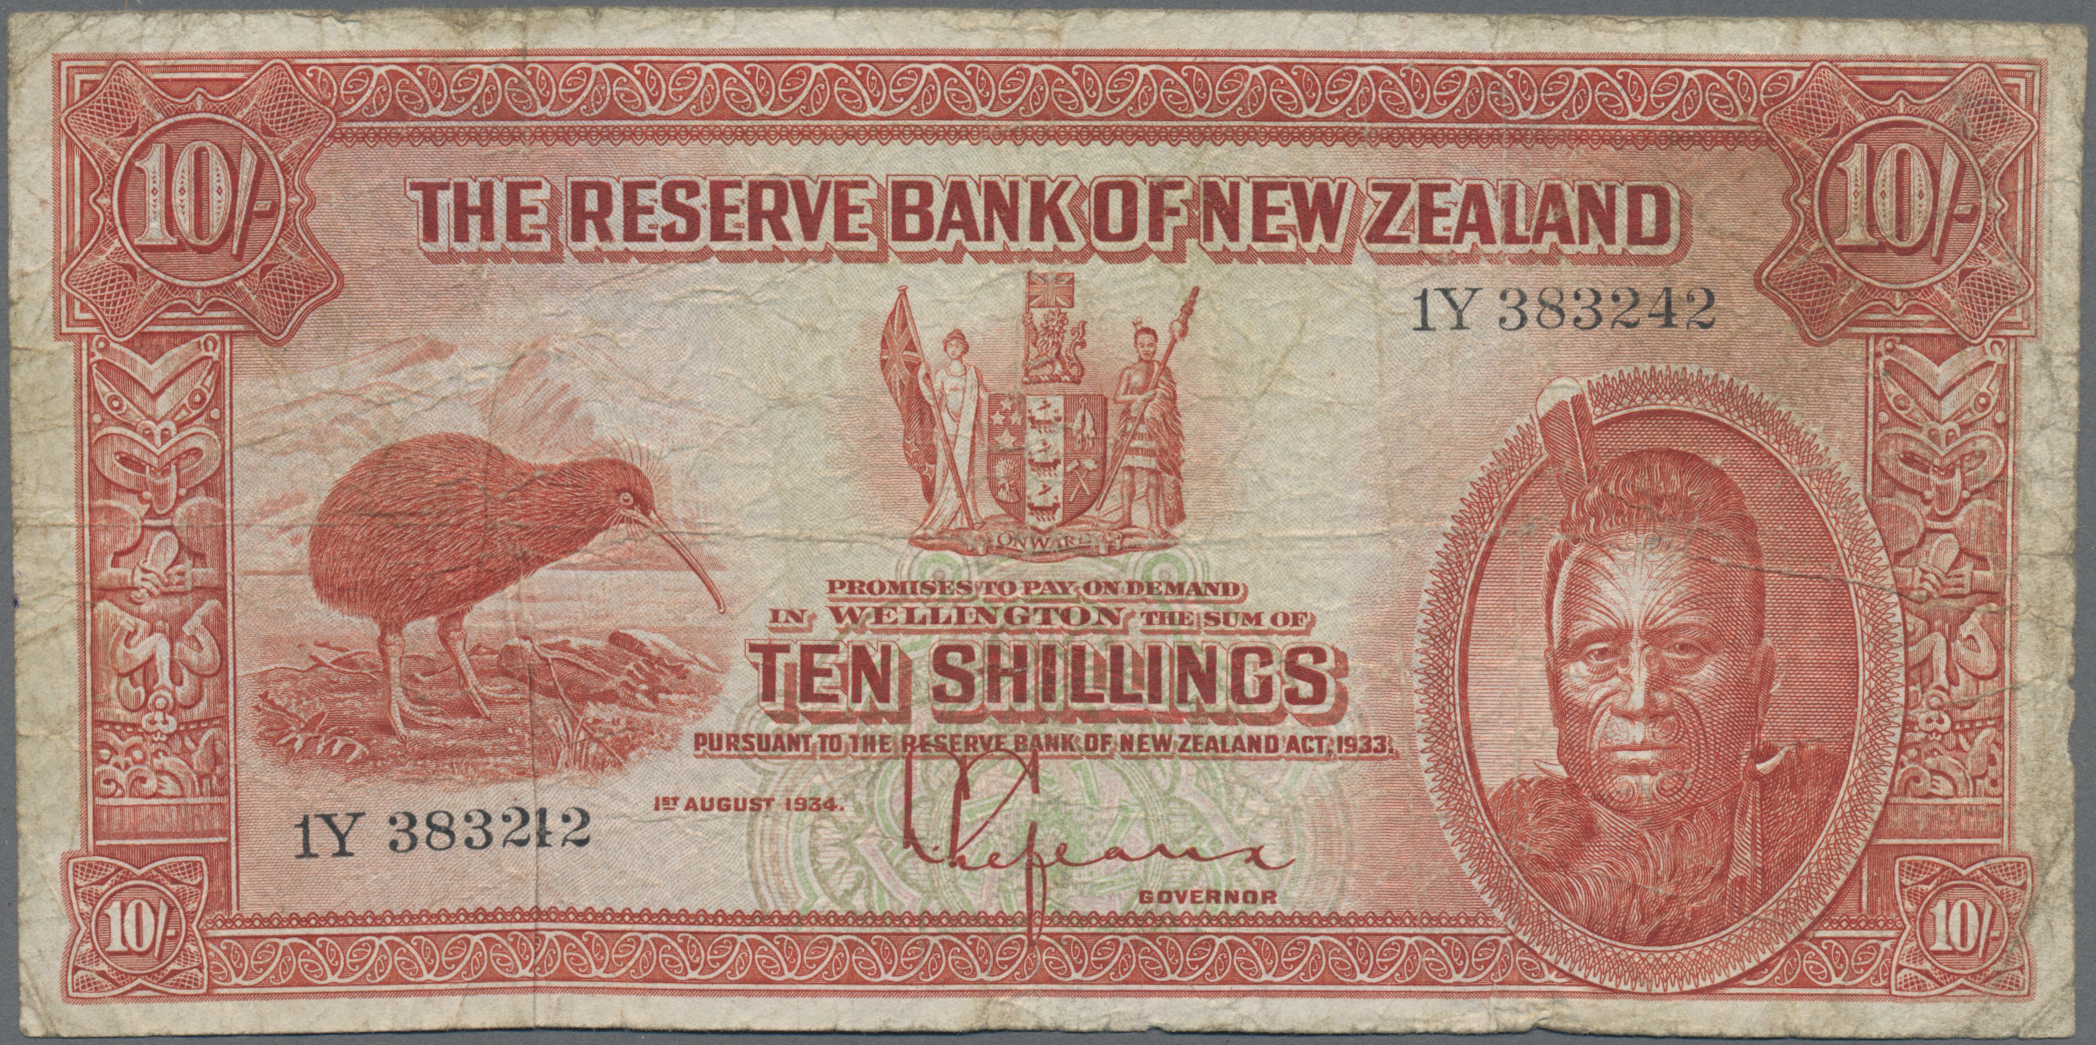 Lot 00344 - New Zealand / Neuseeland | Banknoten  -  Auktionshaus Christoph Gärtner GmbH & Co. KG 55th AUCTION - Day 1